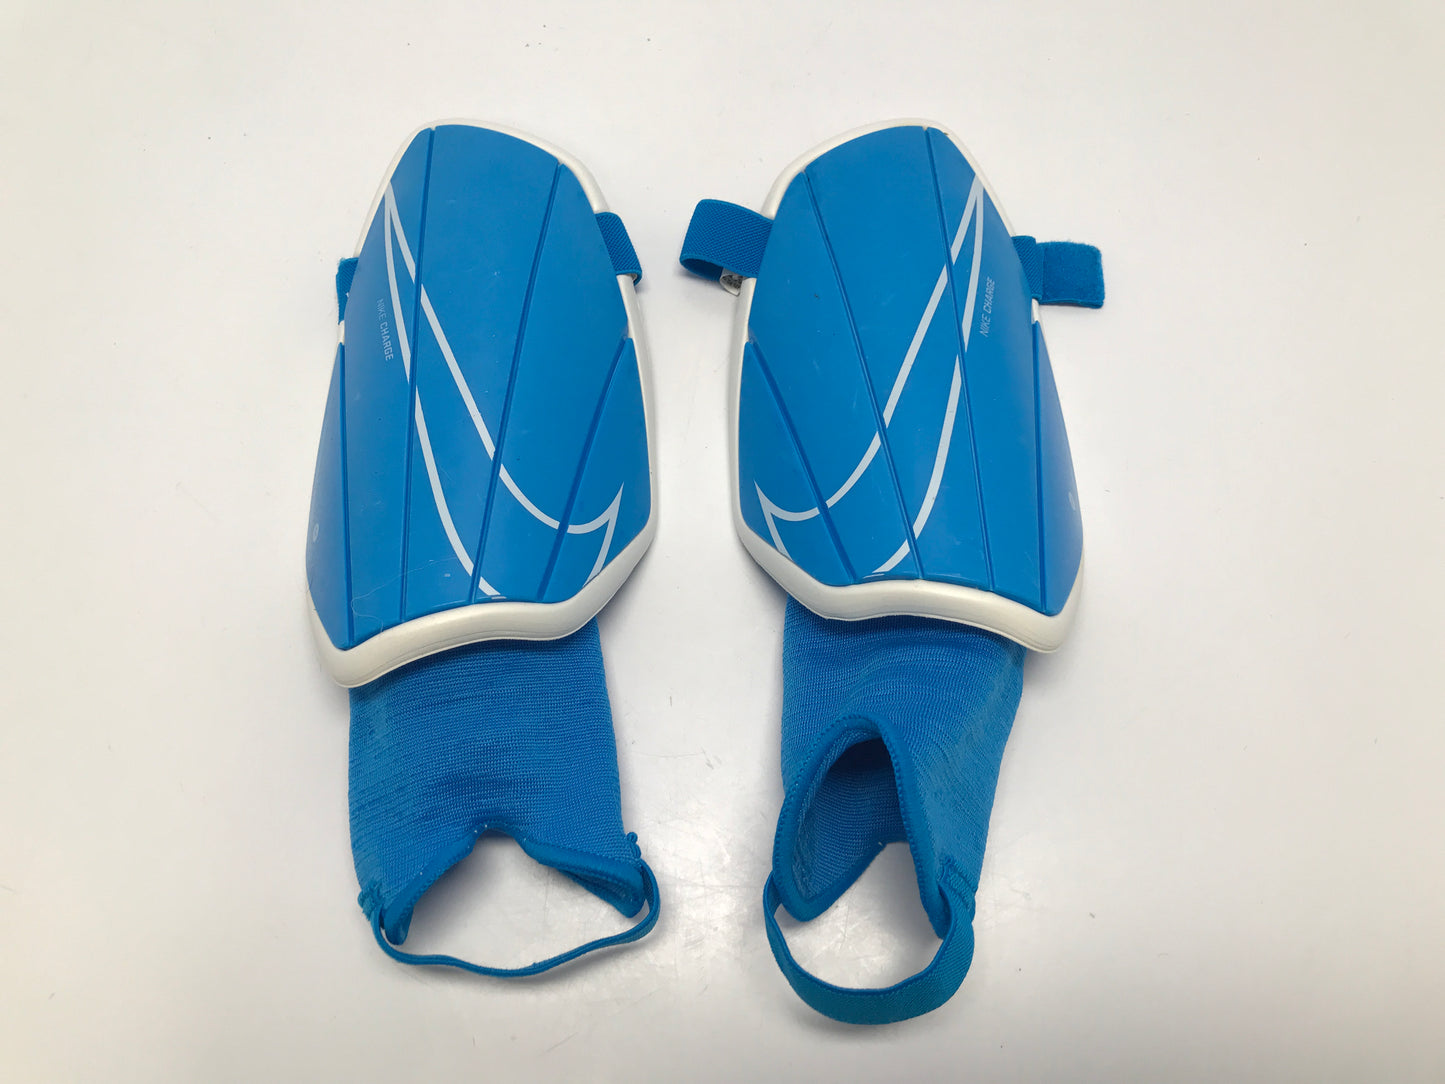 Soccer Shin Pads Child Size 10-12 Nike Charge Blue White Like New